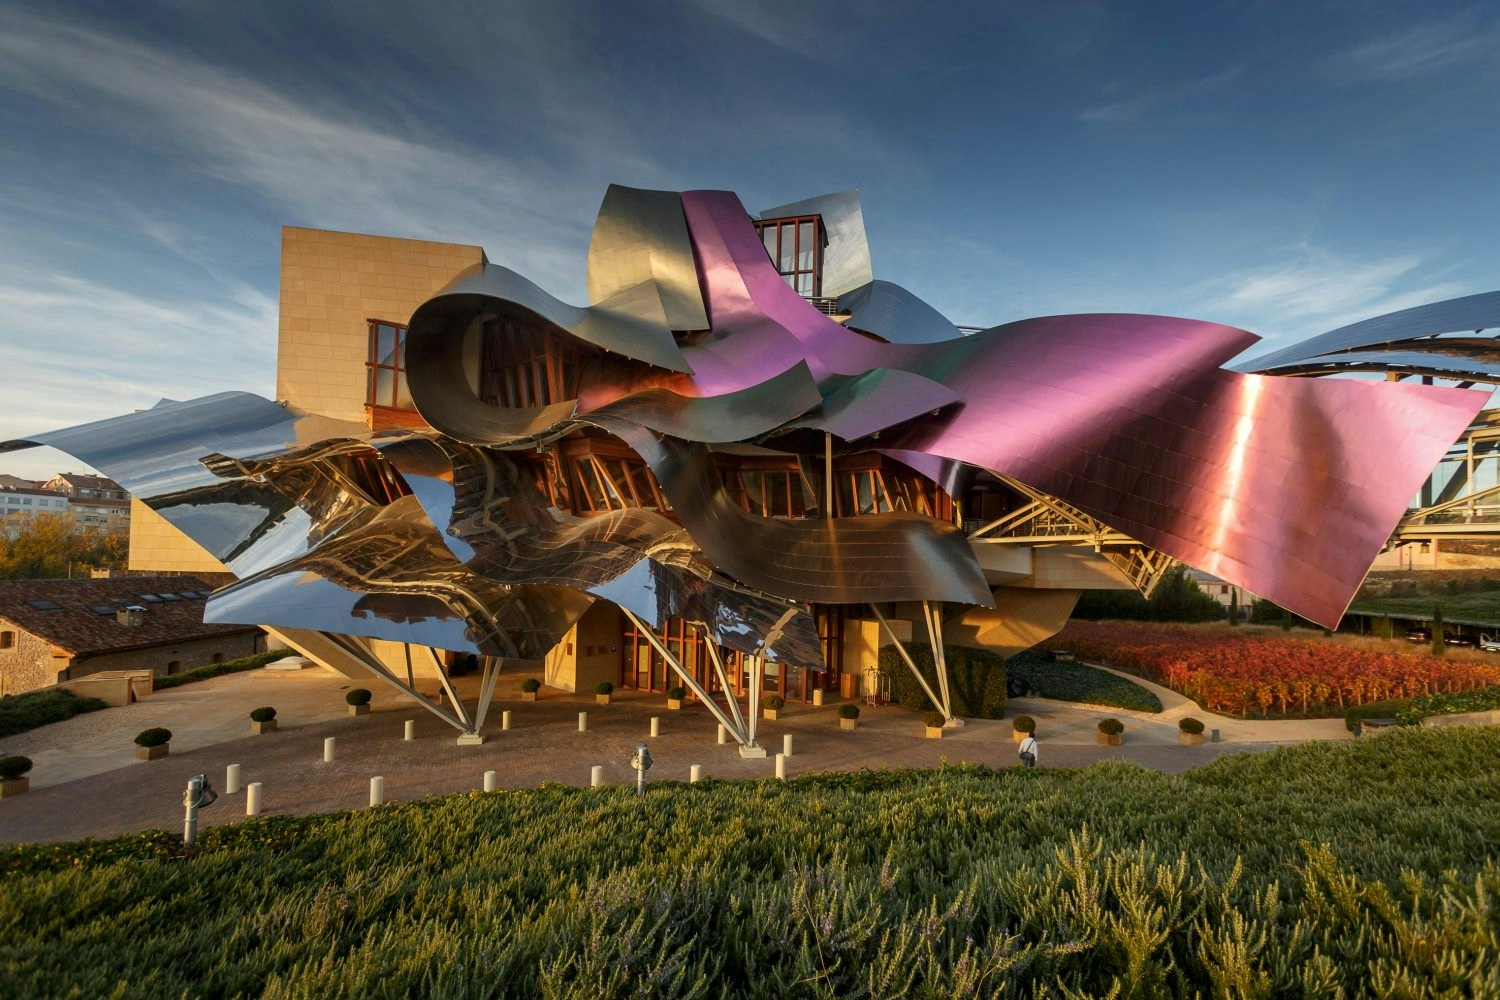 The exterior of Marques de Riscal in Spain